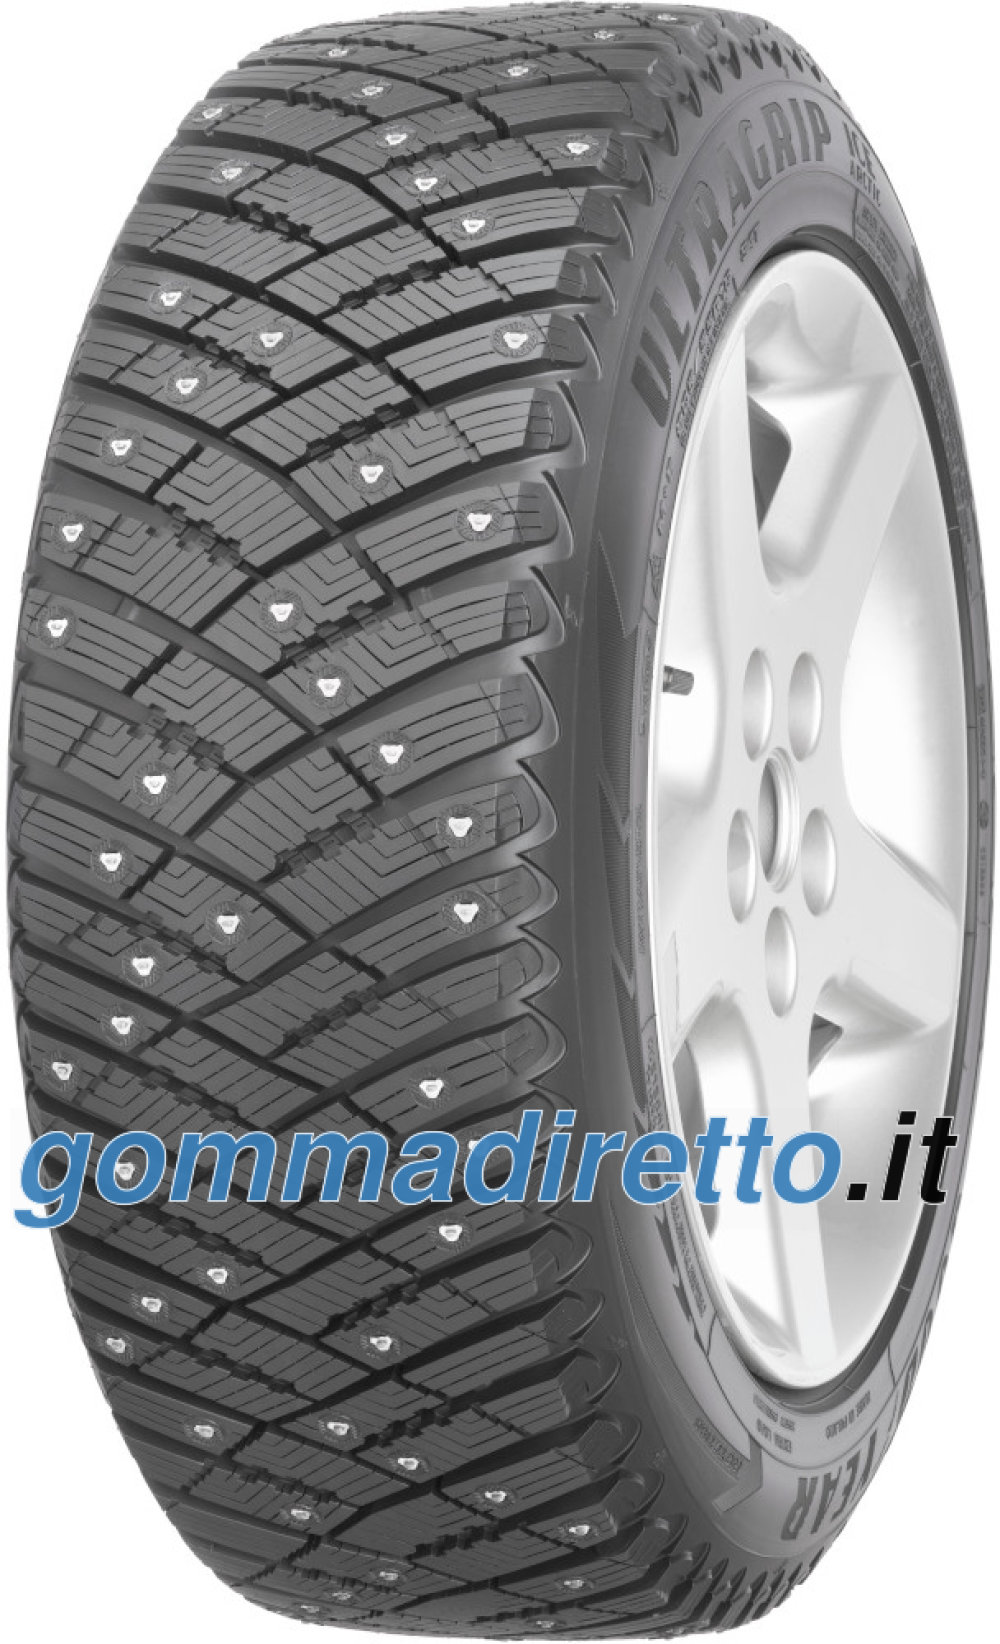 Image of Goodyear Ultra Grip Ice Arctic ( 185/60 R15 88T XL, pneumatico chiodato )